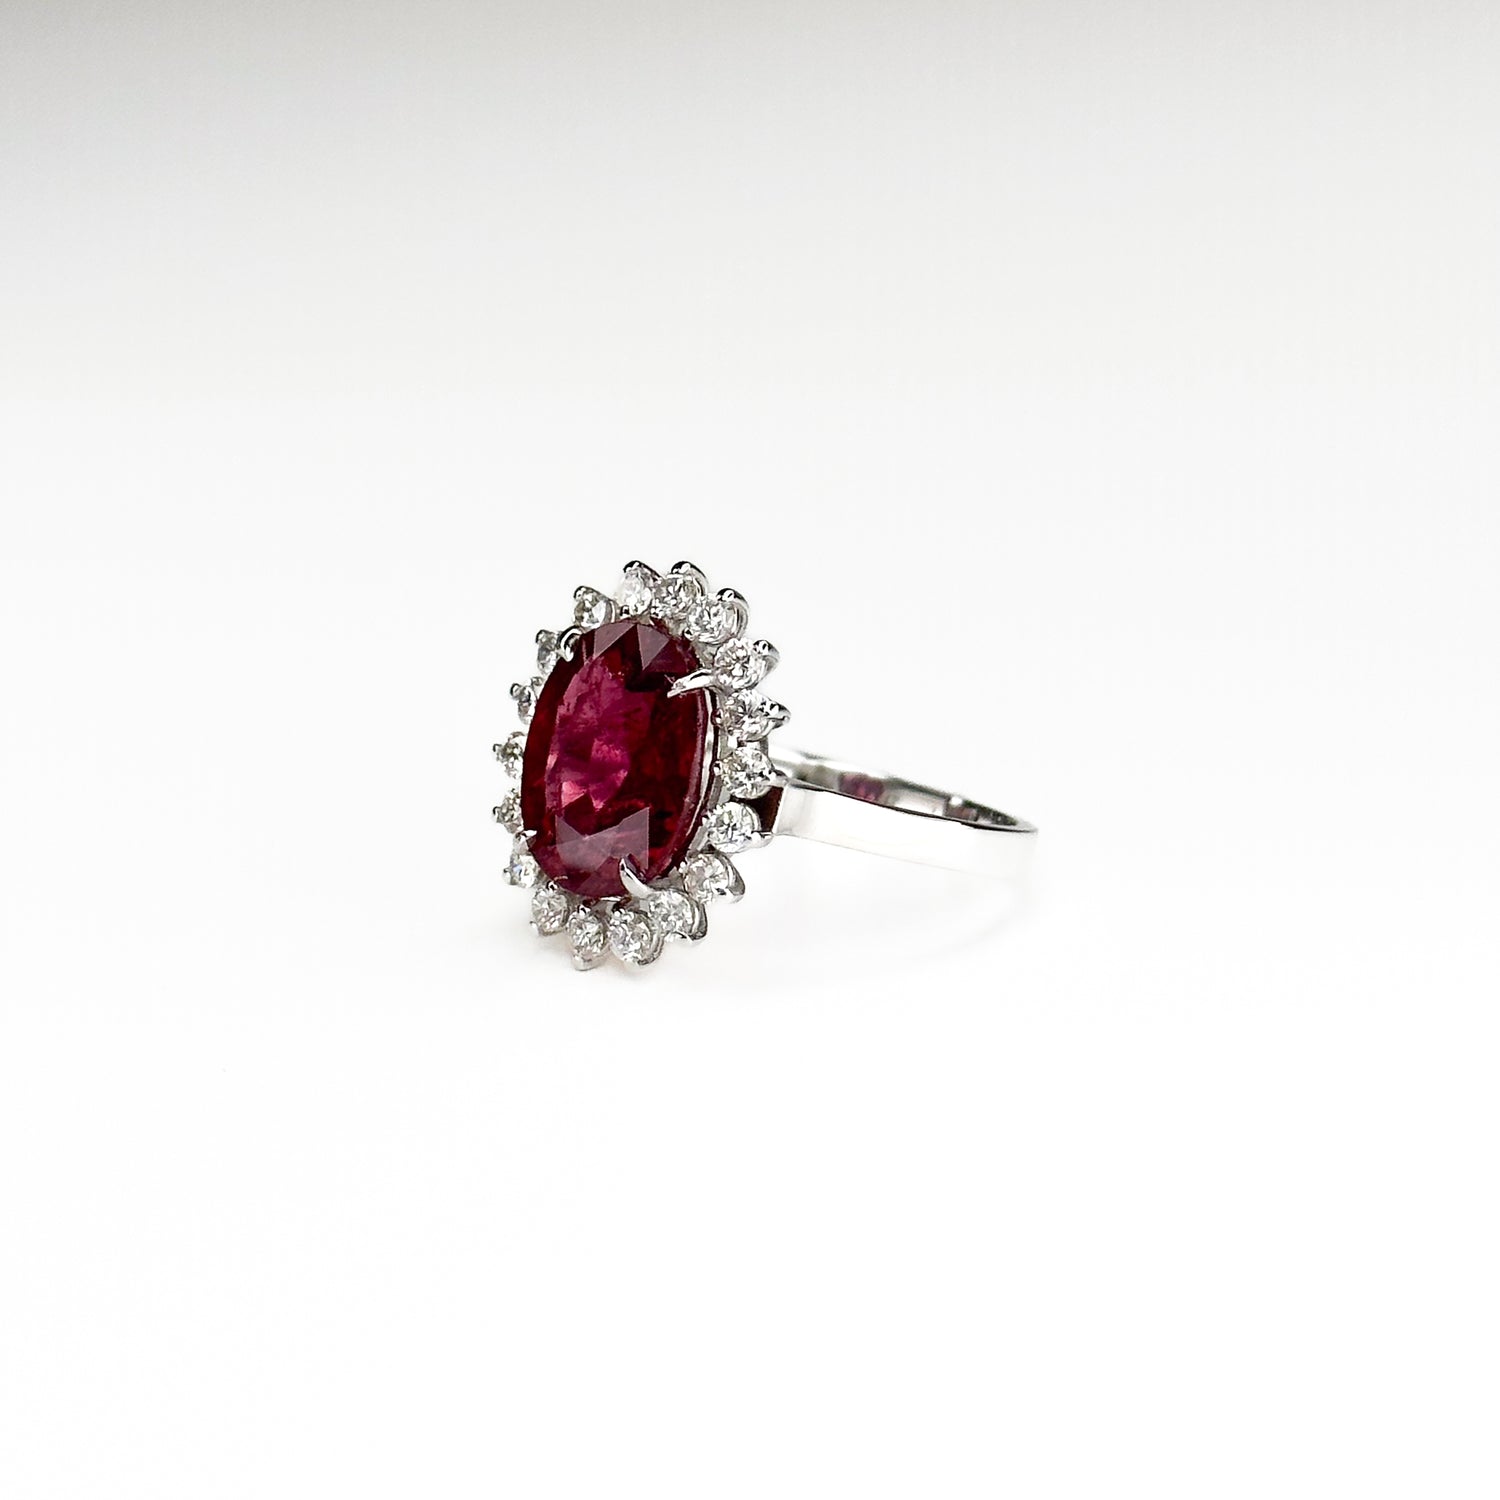 4.37ct Oval Pink Ruby Ring